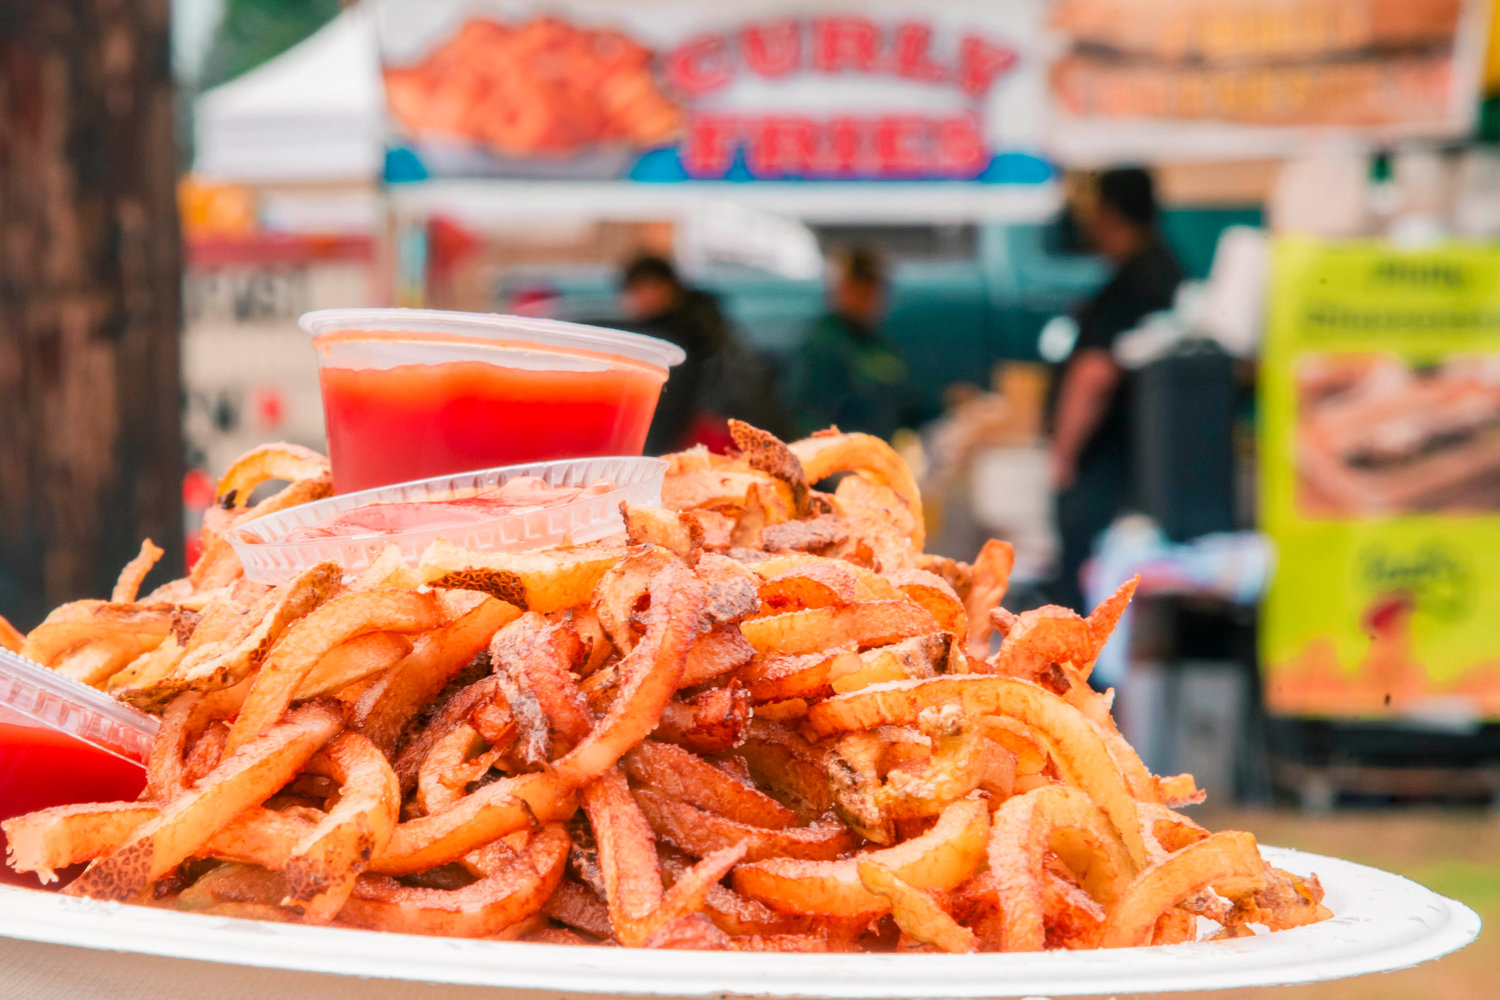 A plate of curly fries are displayed on a plate at the Packwood Flea Market on Friday.